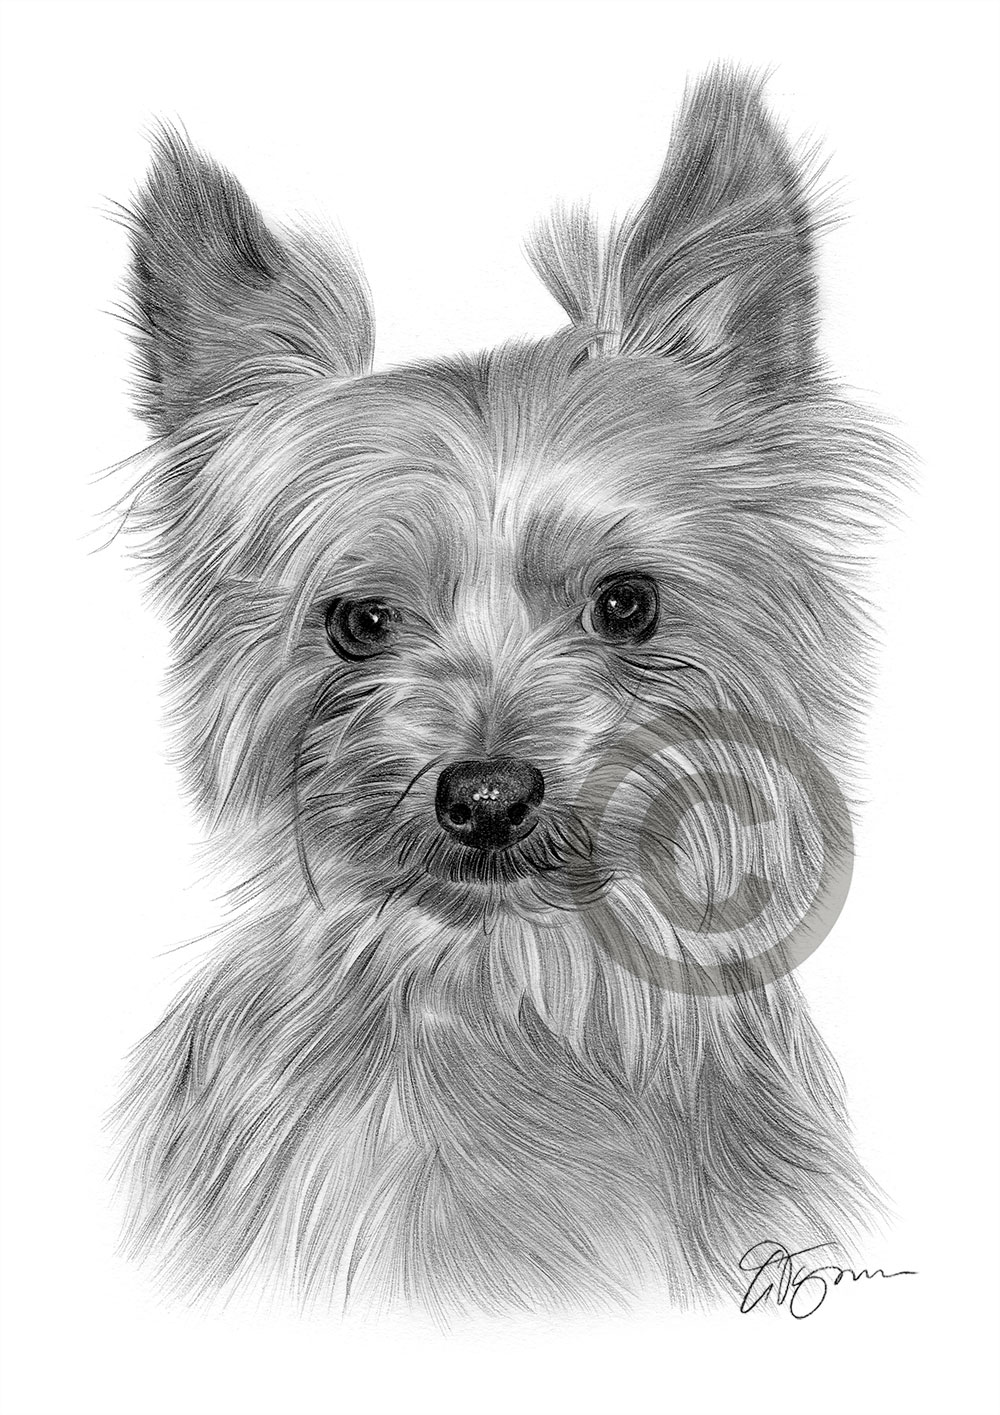 Pencil drawing portrait of a Yorkshire Terrier by artist Gary Tymon